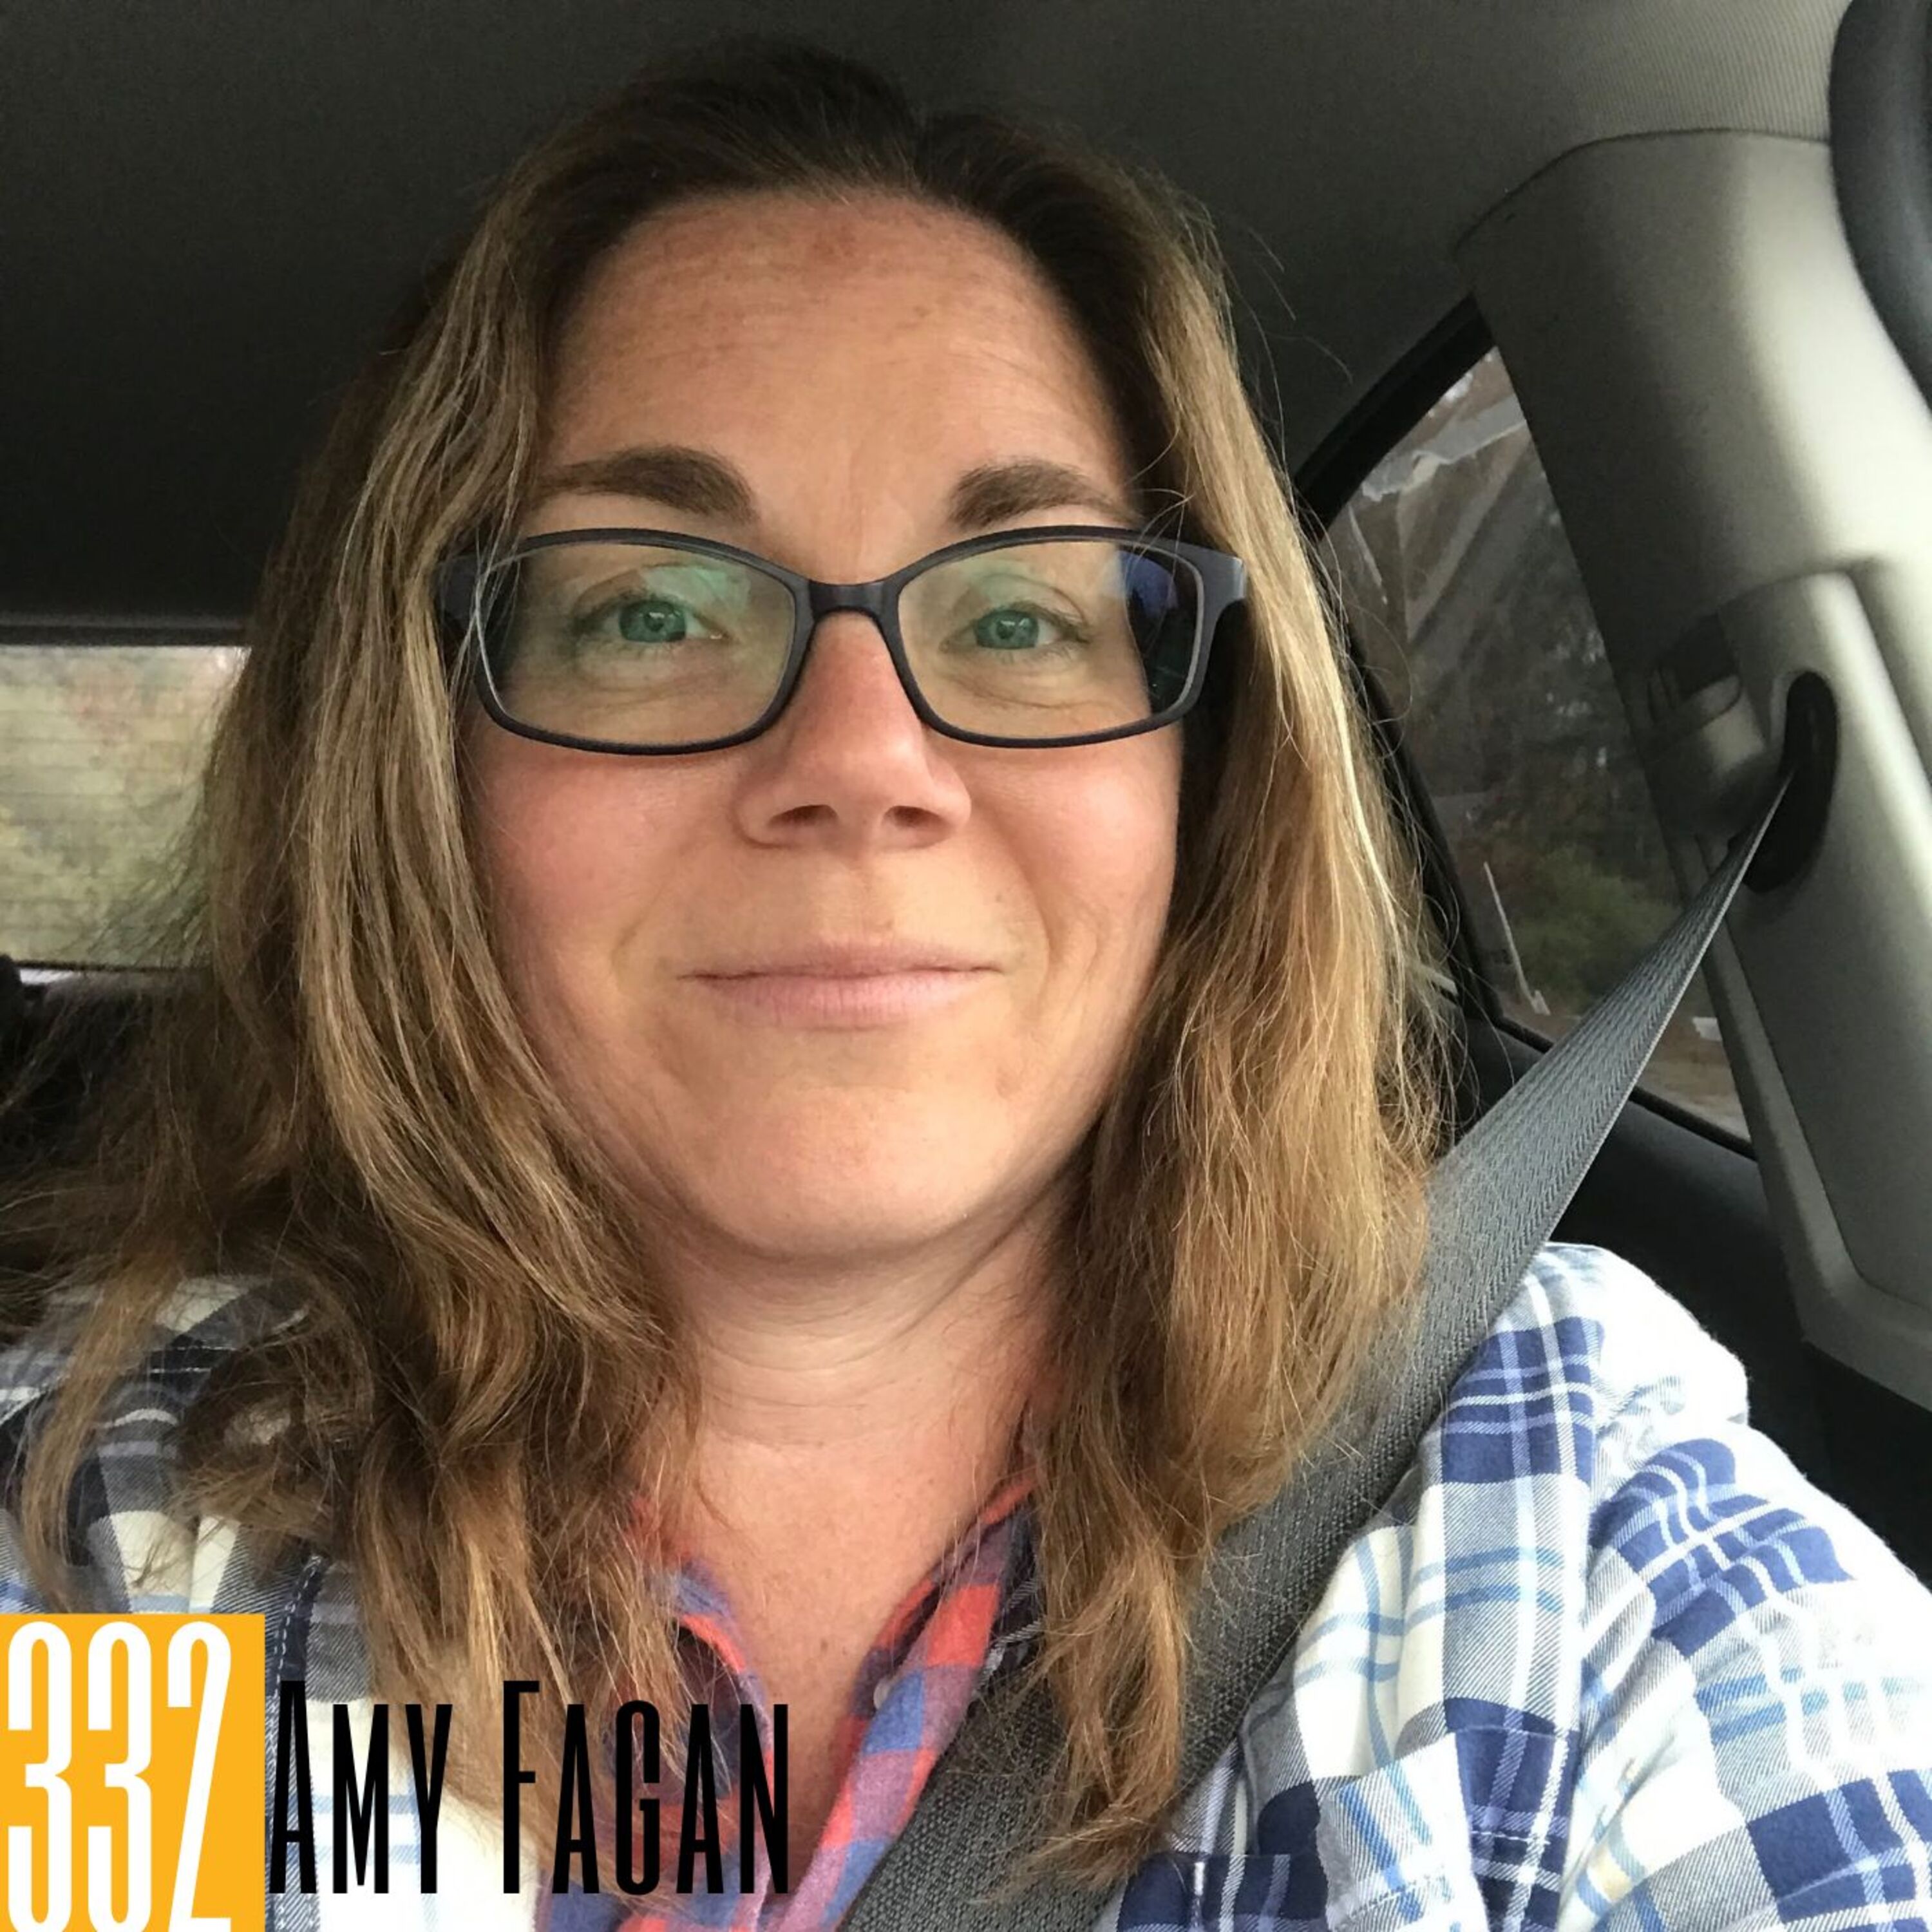 332 Amy Fagan - From Homesteading to Amplifying Voices: A Podcasting Adventure